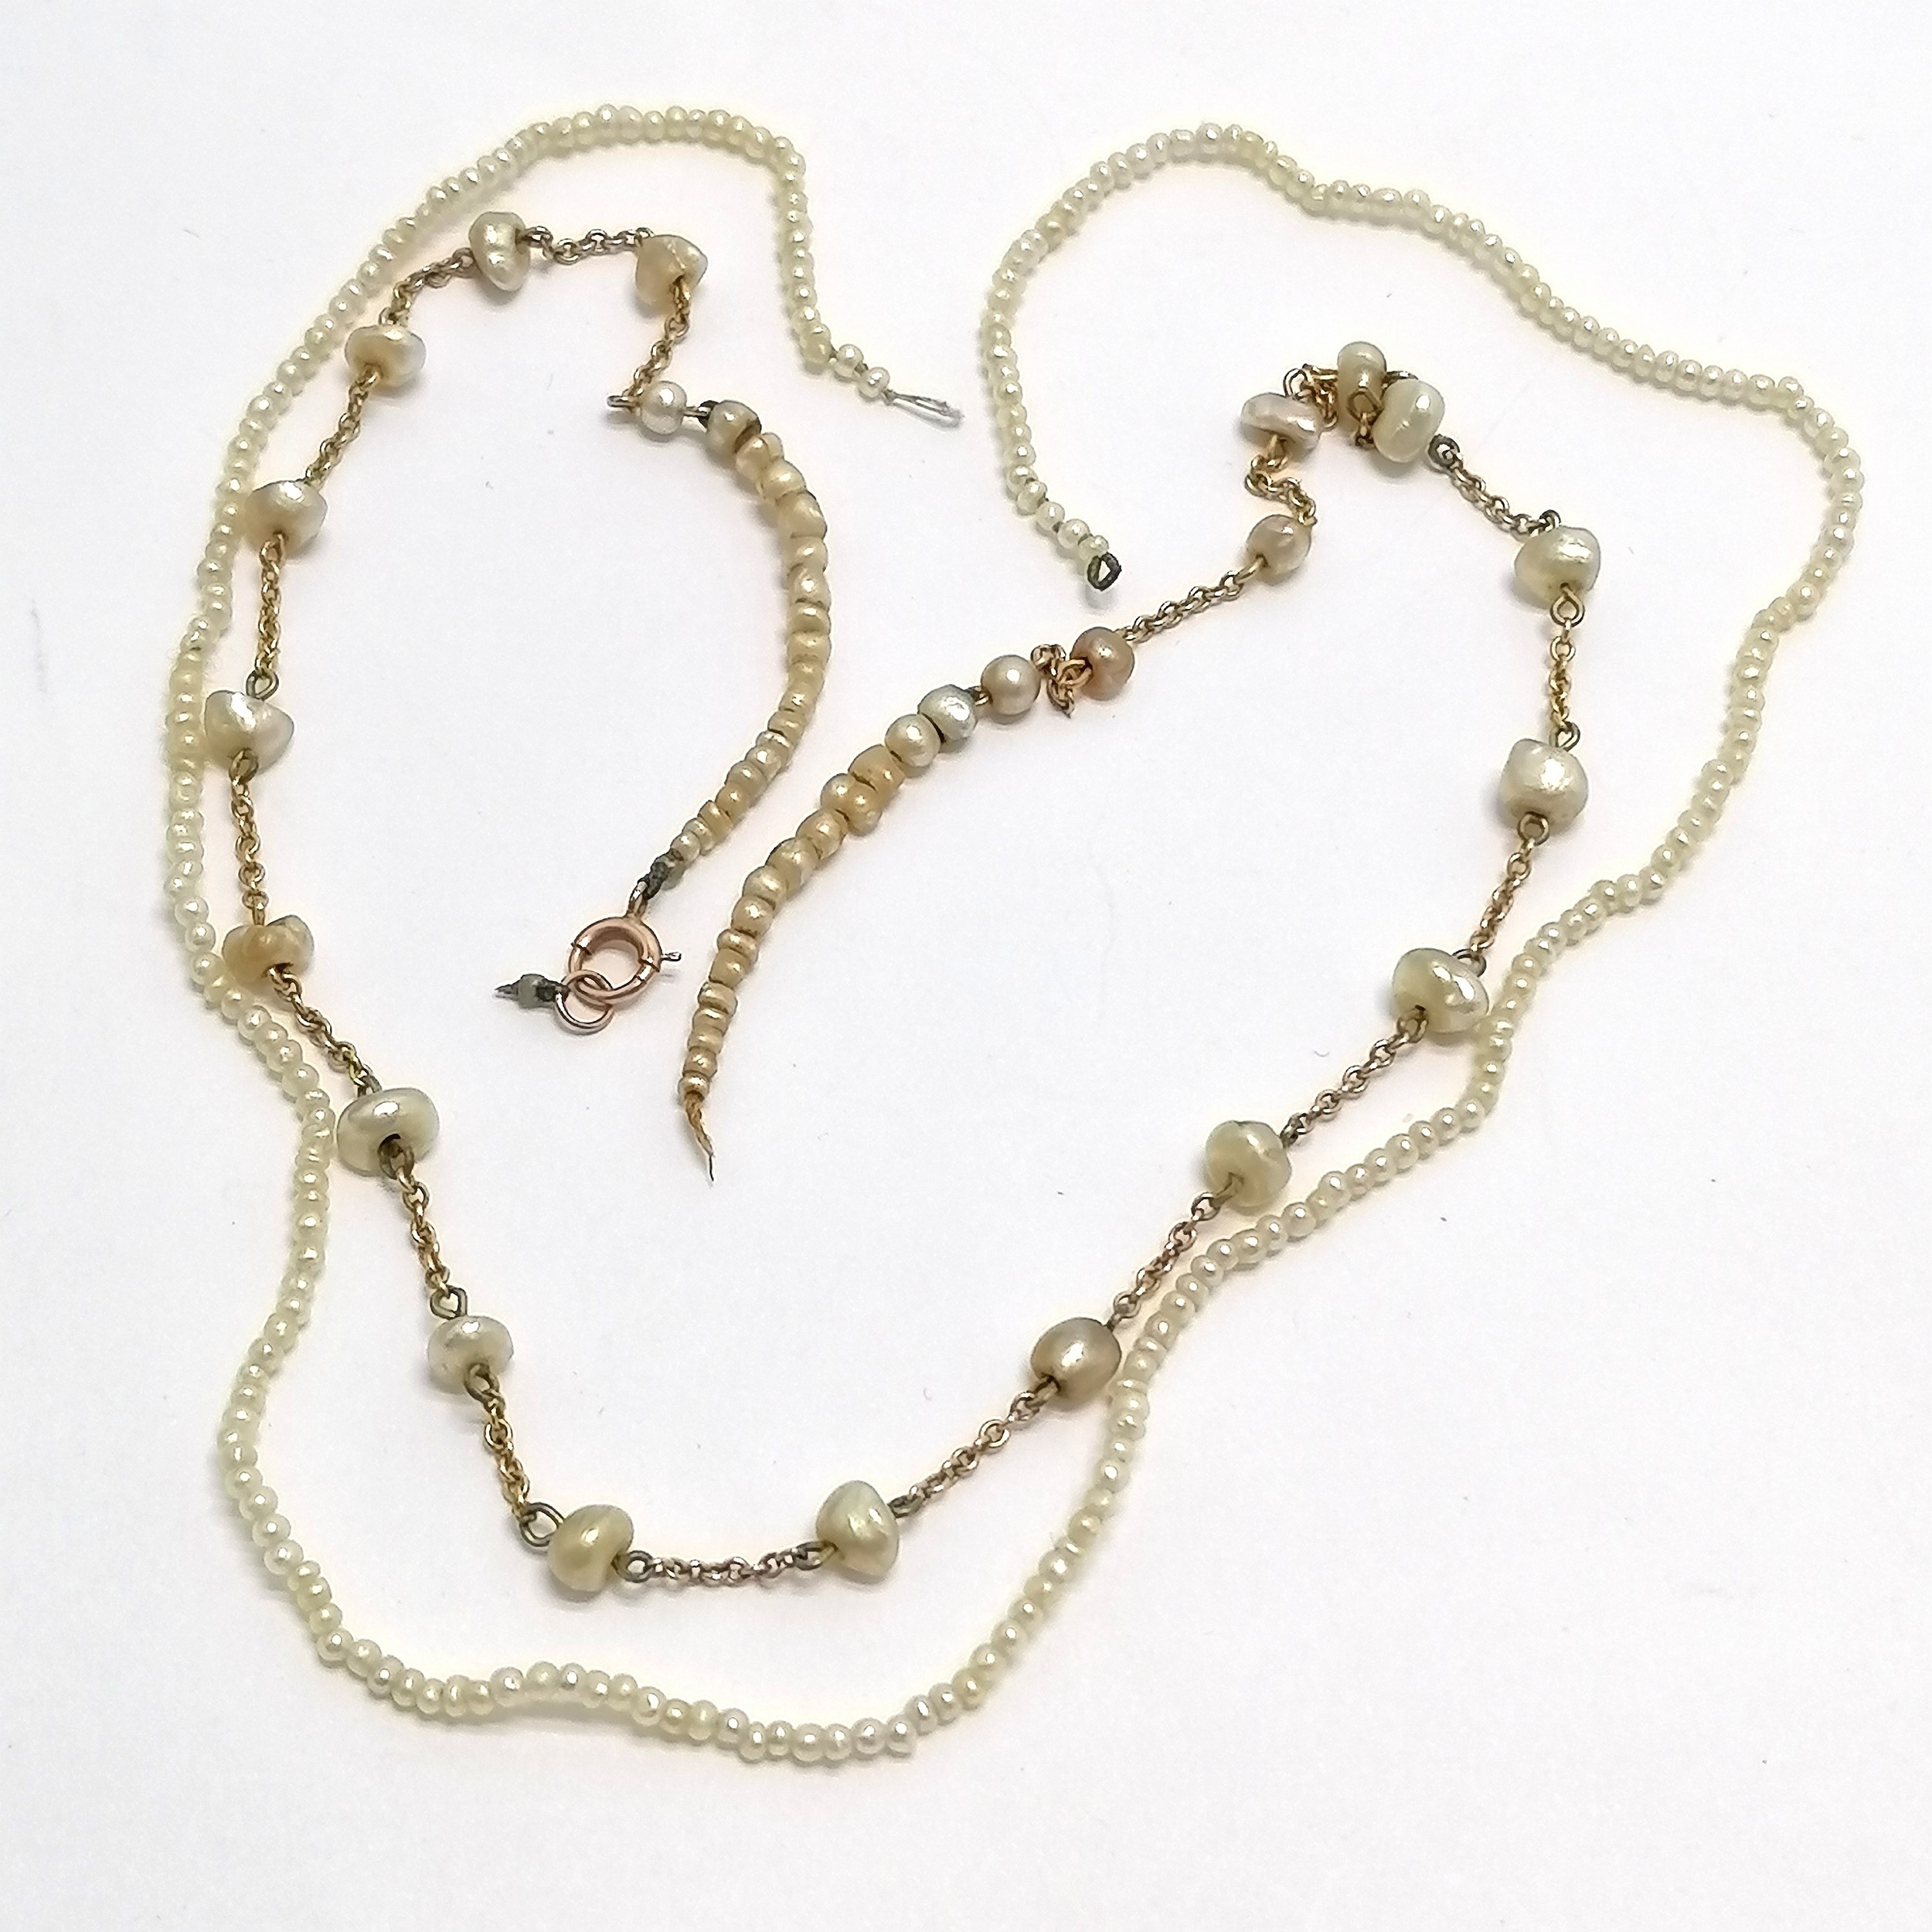 2 x antique natural pearl necklaces - baroque pearl necklace has 9ct gold clasp + chain (42cm) ~